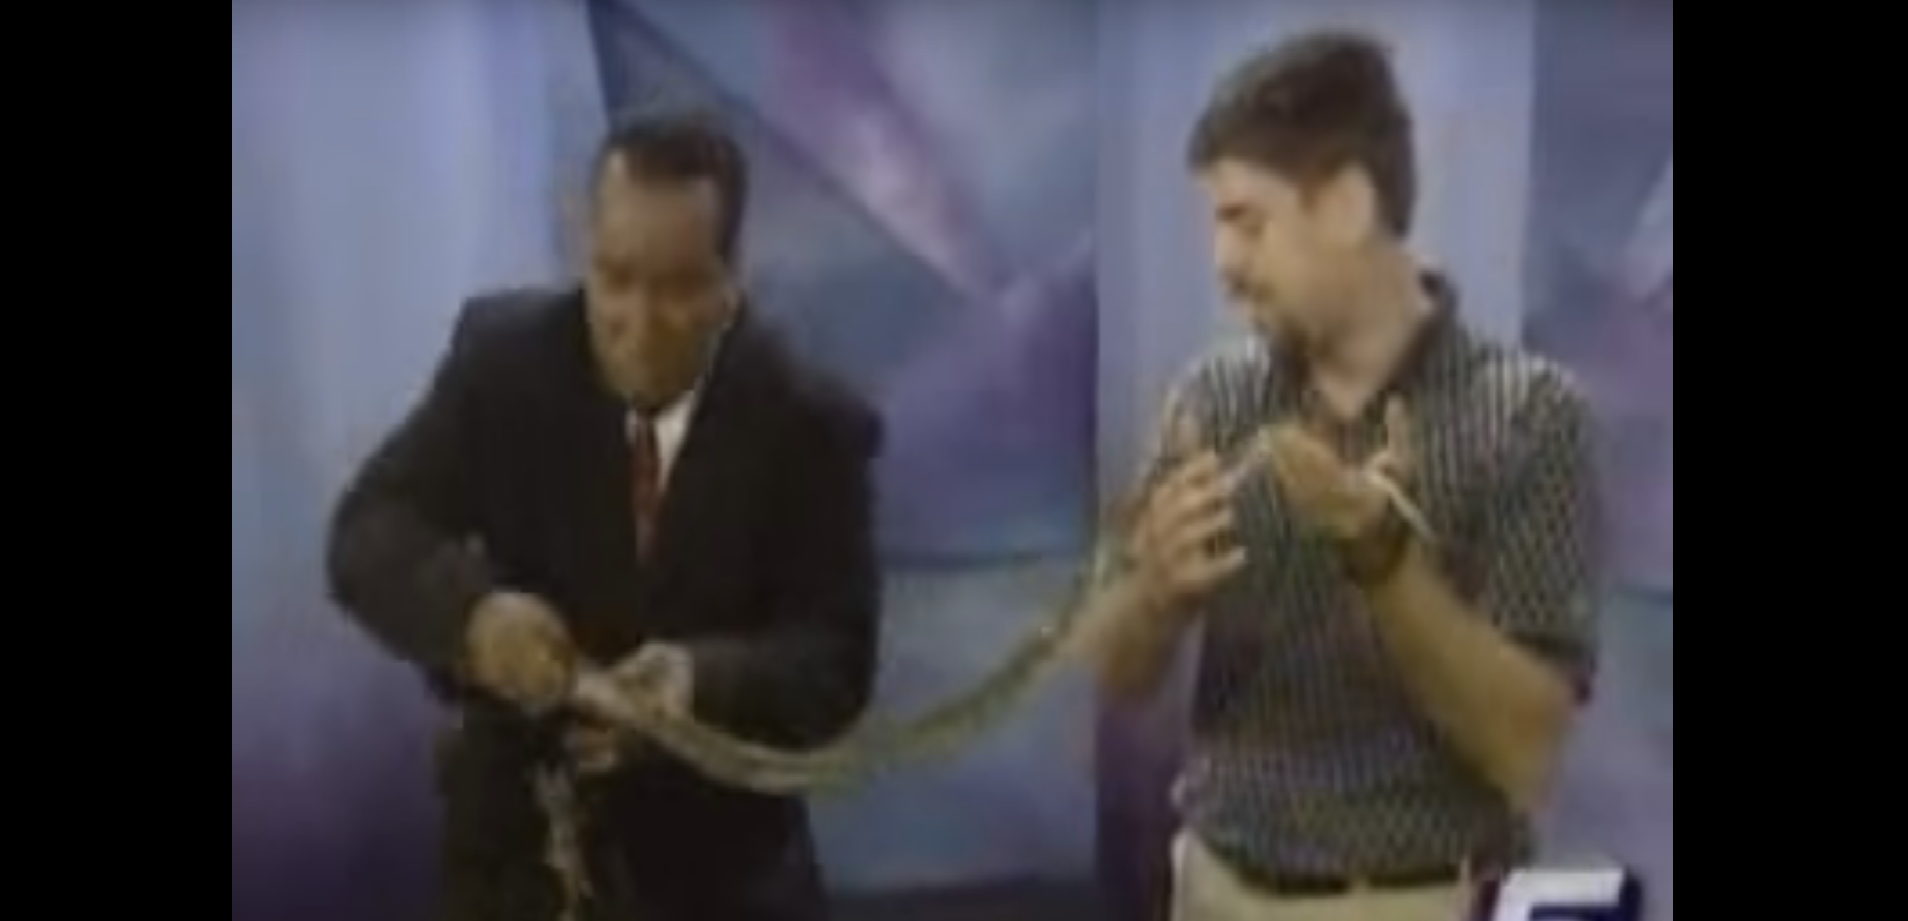 Watch This News Anchor Go Nuts After Lizard Jumps on Him